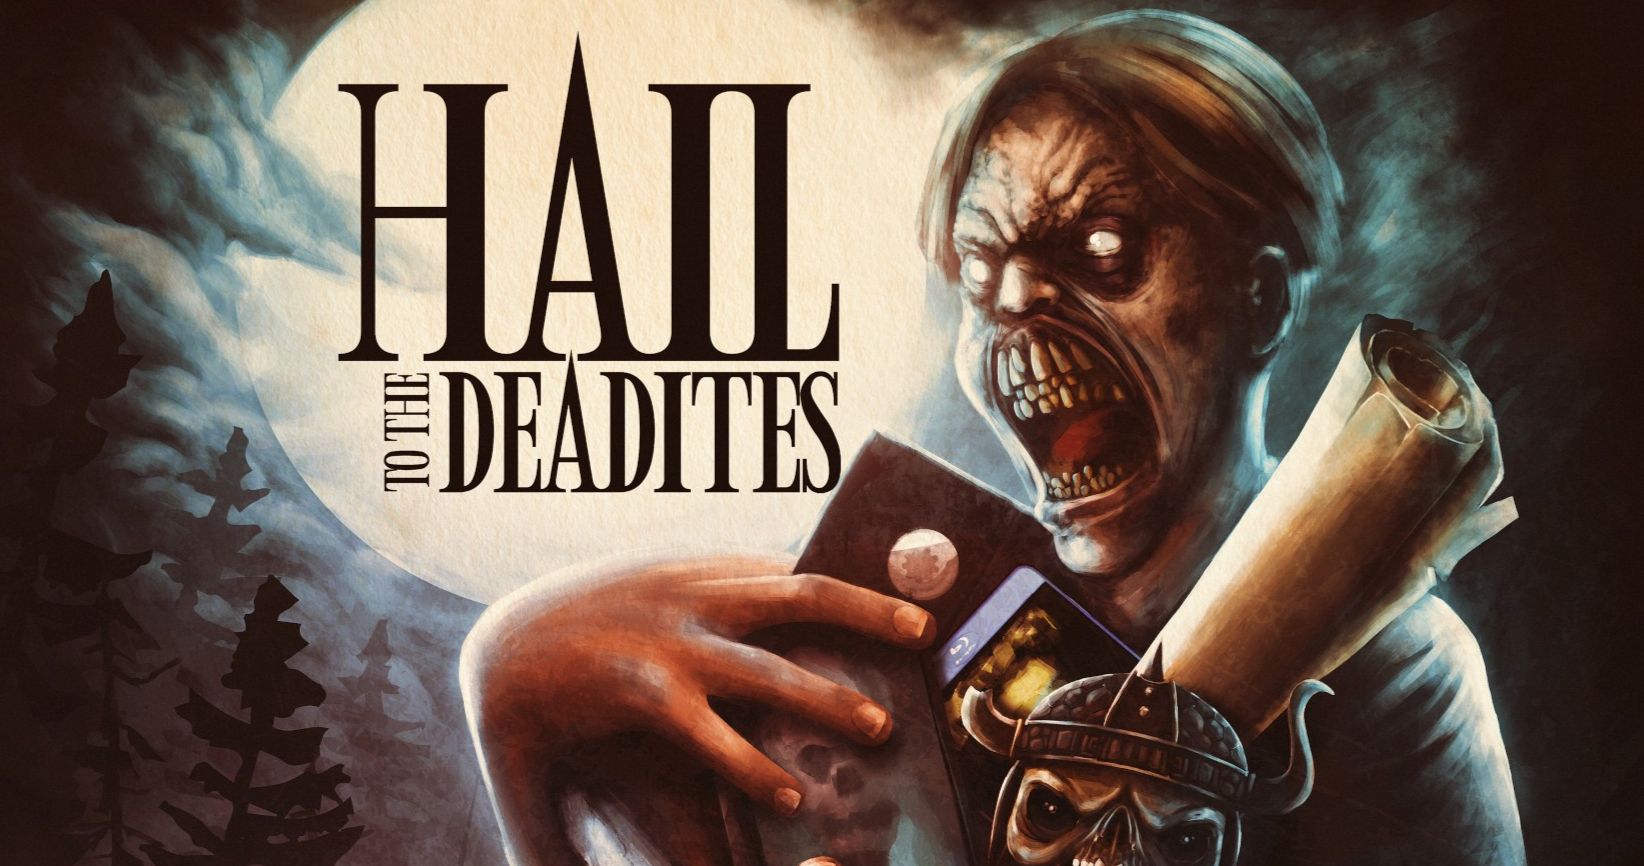 Evil Dead Documentary Hail to the Deadites Gets a Streaming Release This July